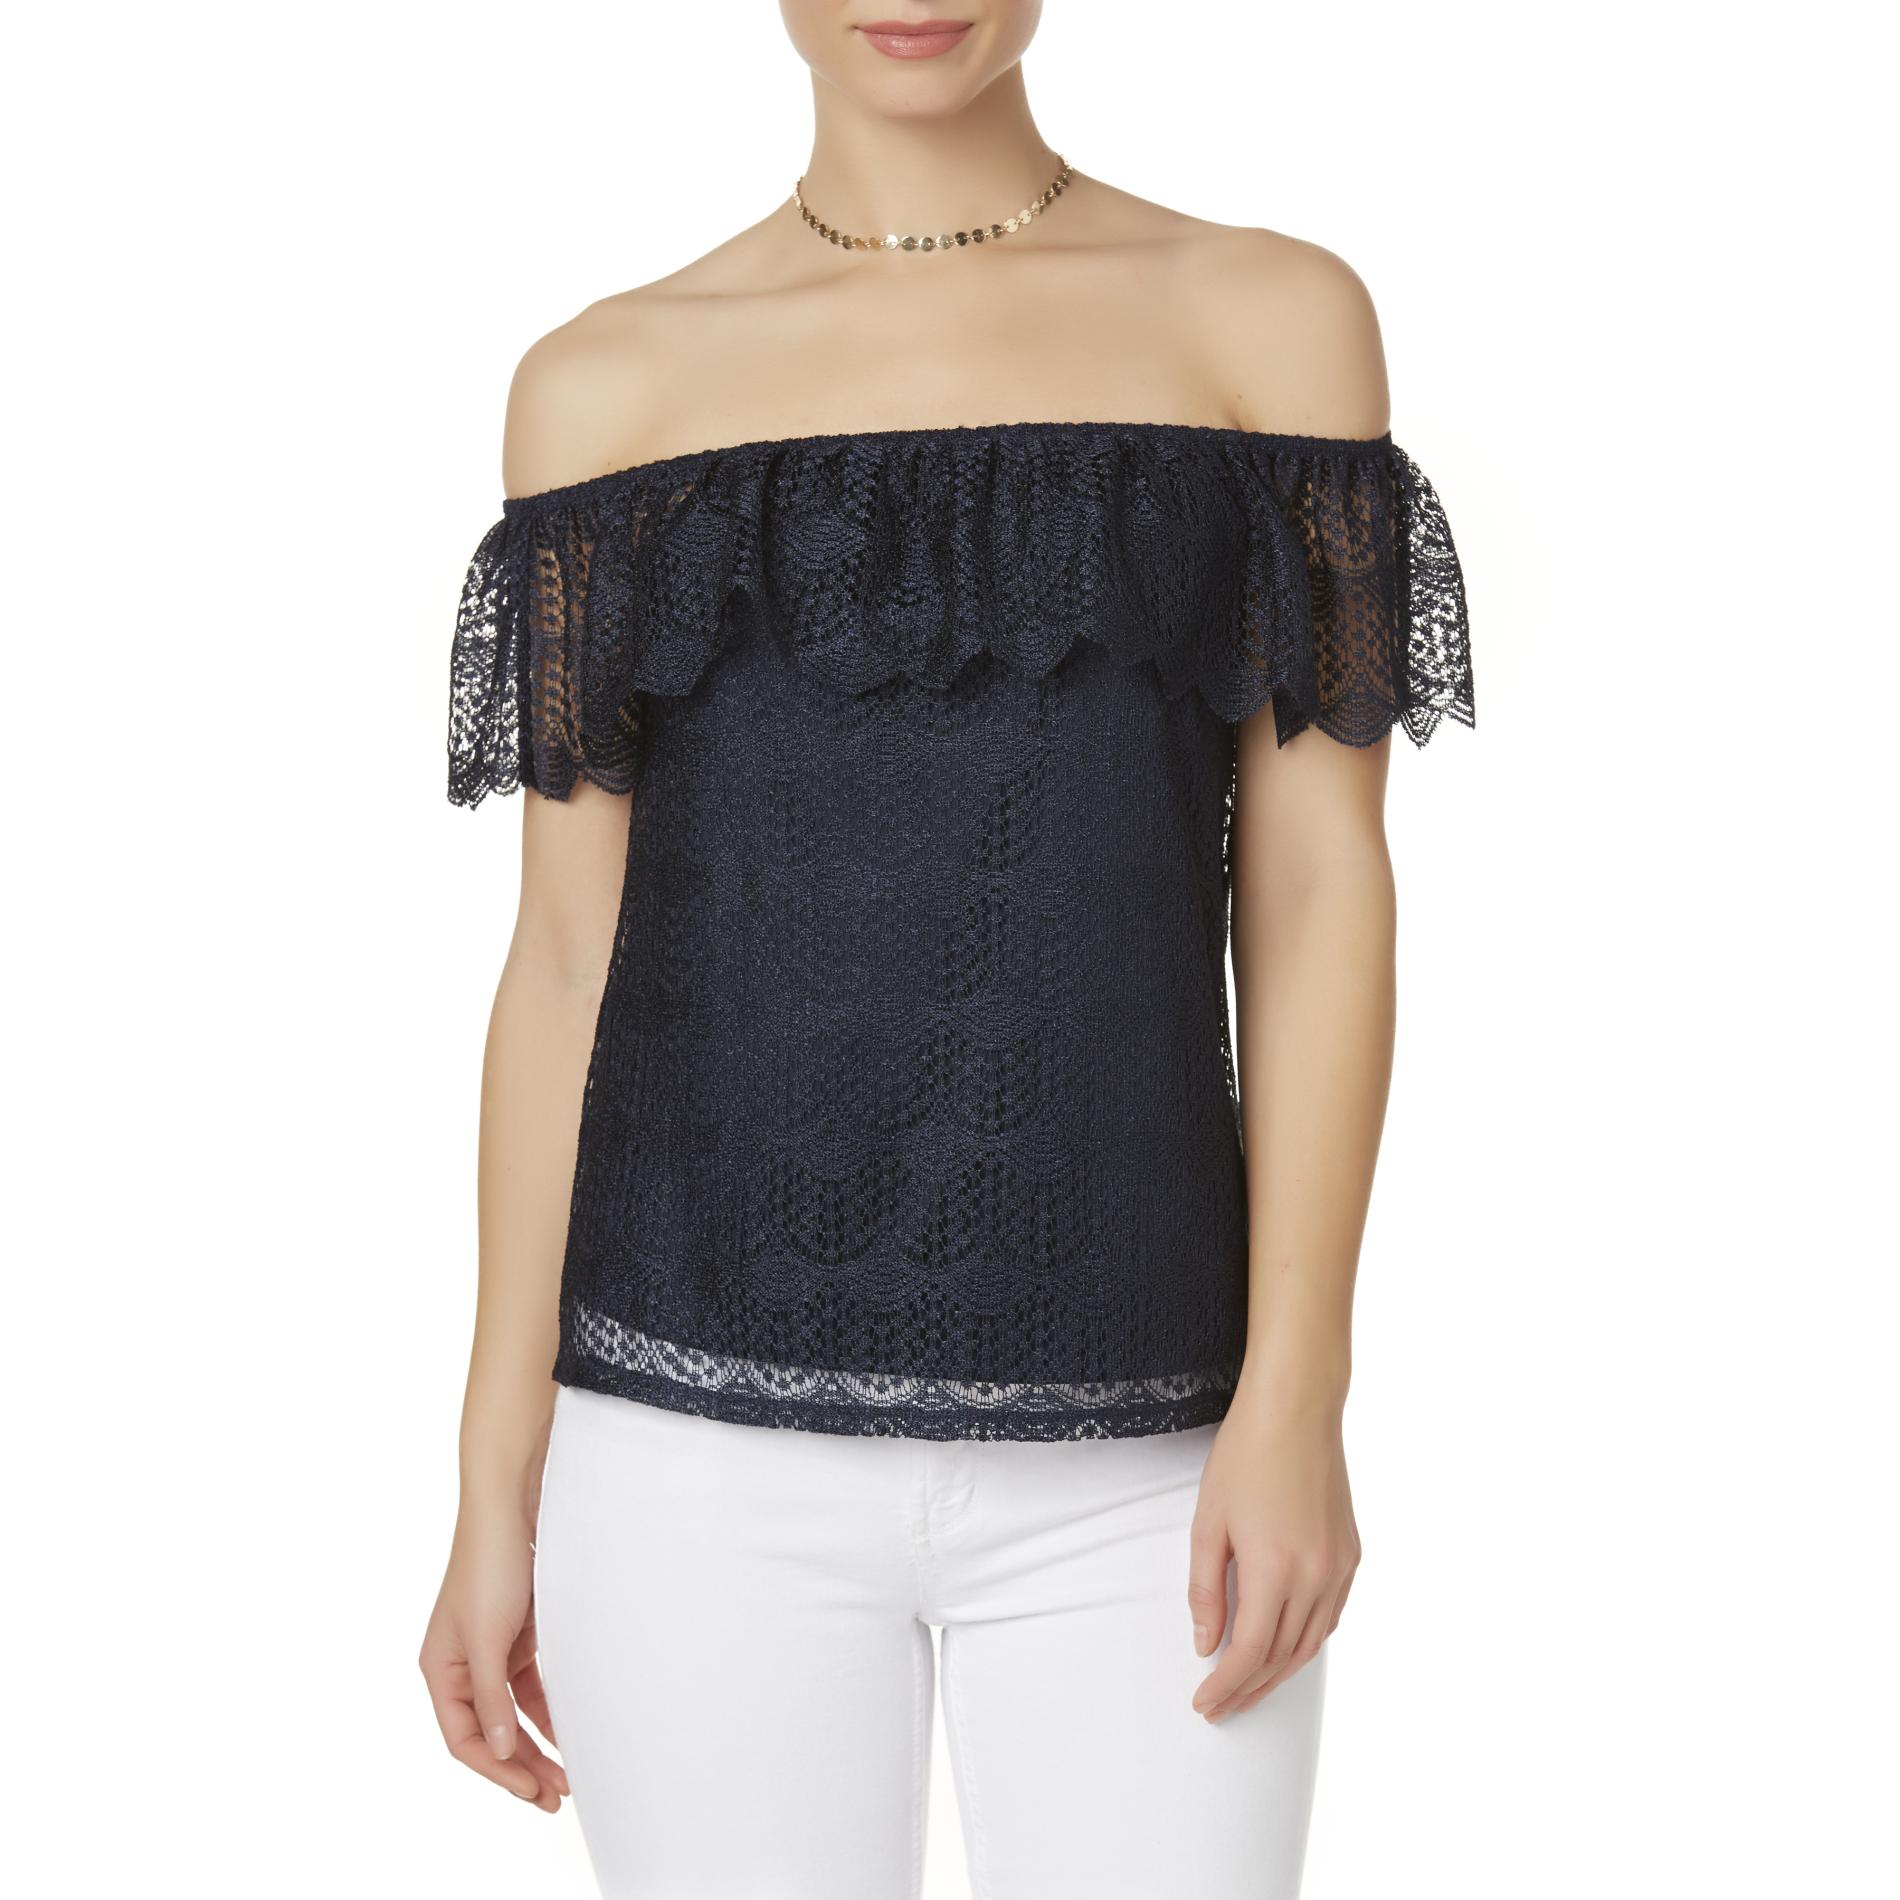 Simply Styled Petites' Crochet Off-The-Shoulder Top